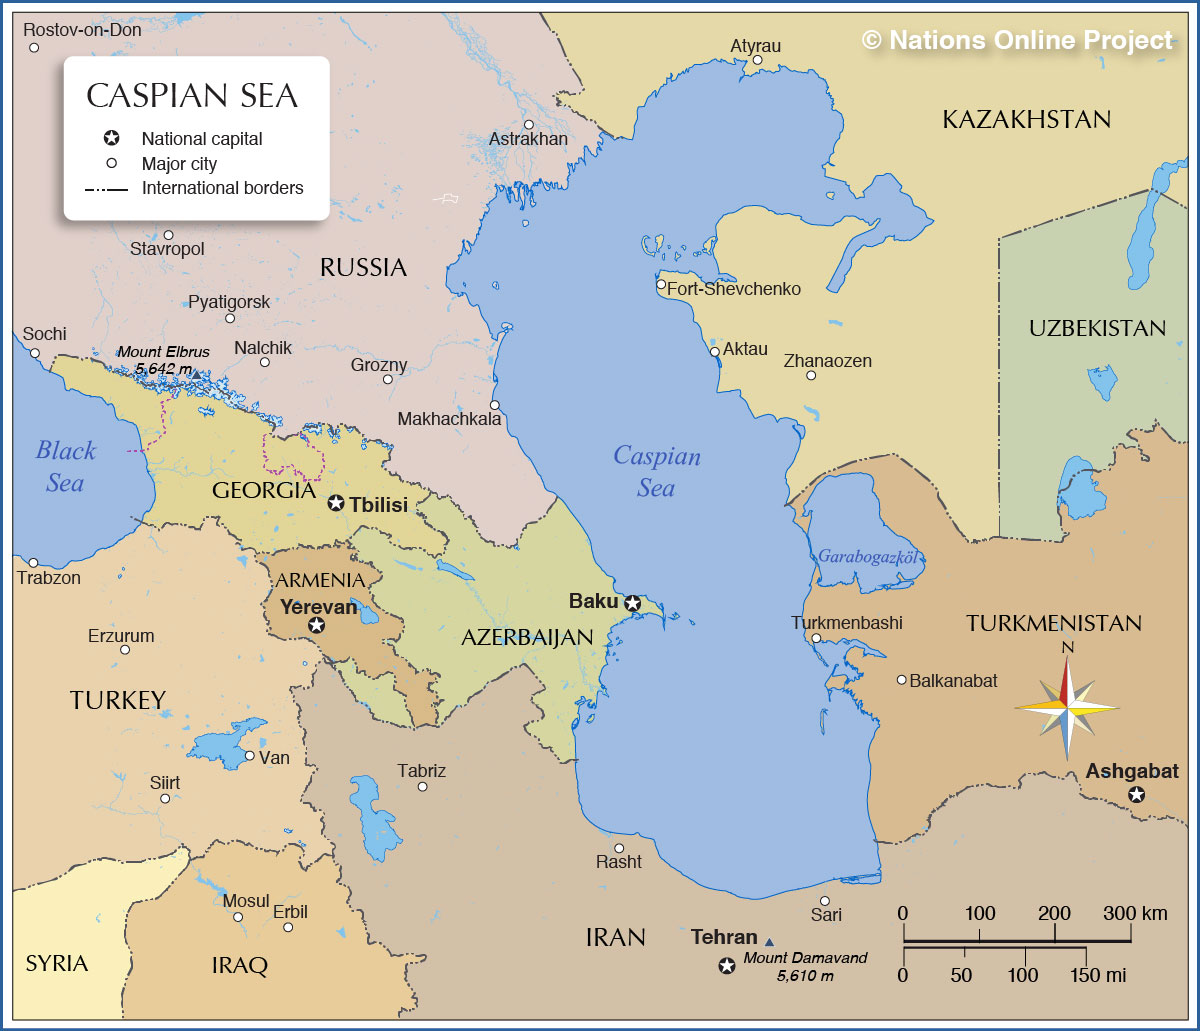 Map of the Caspian Sea - Nations Online Project